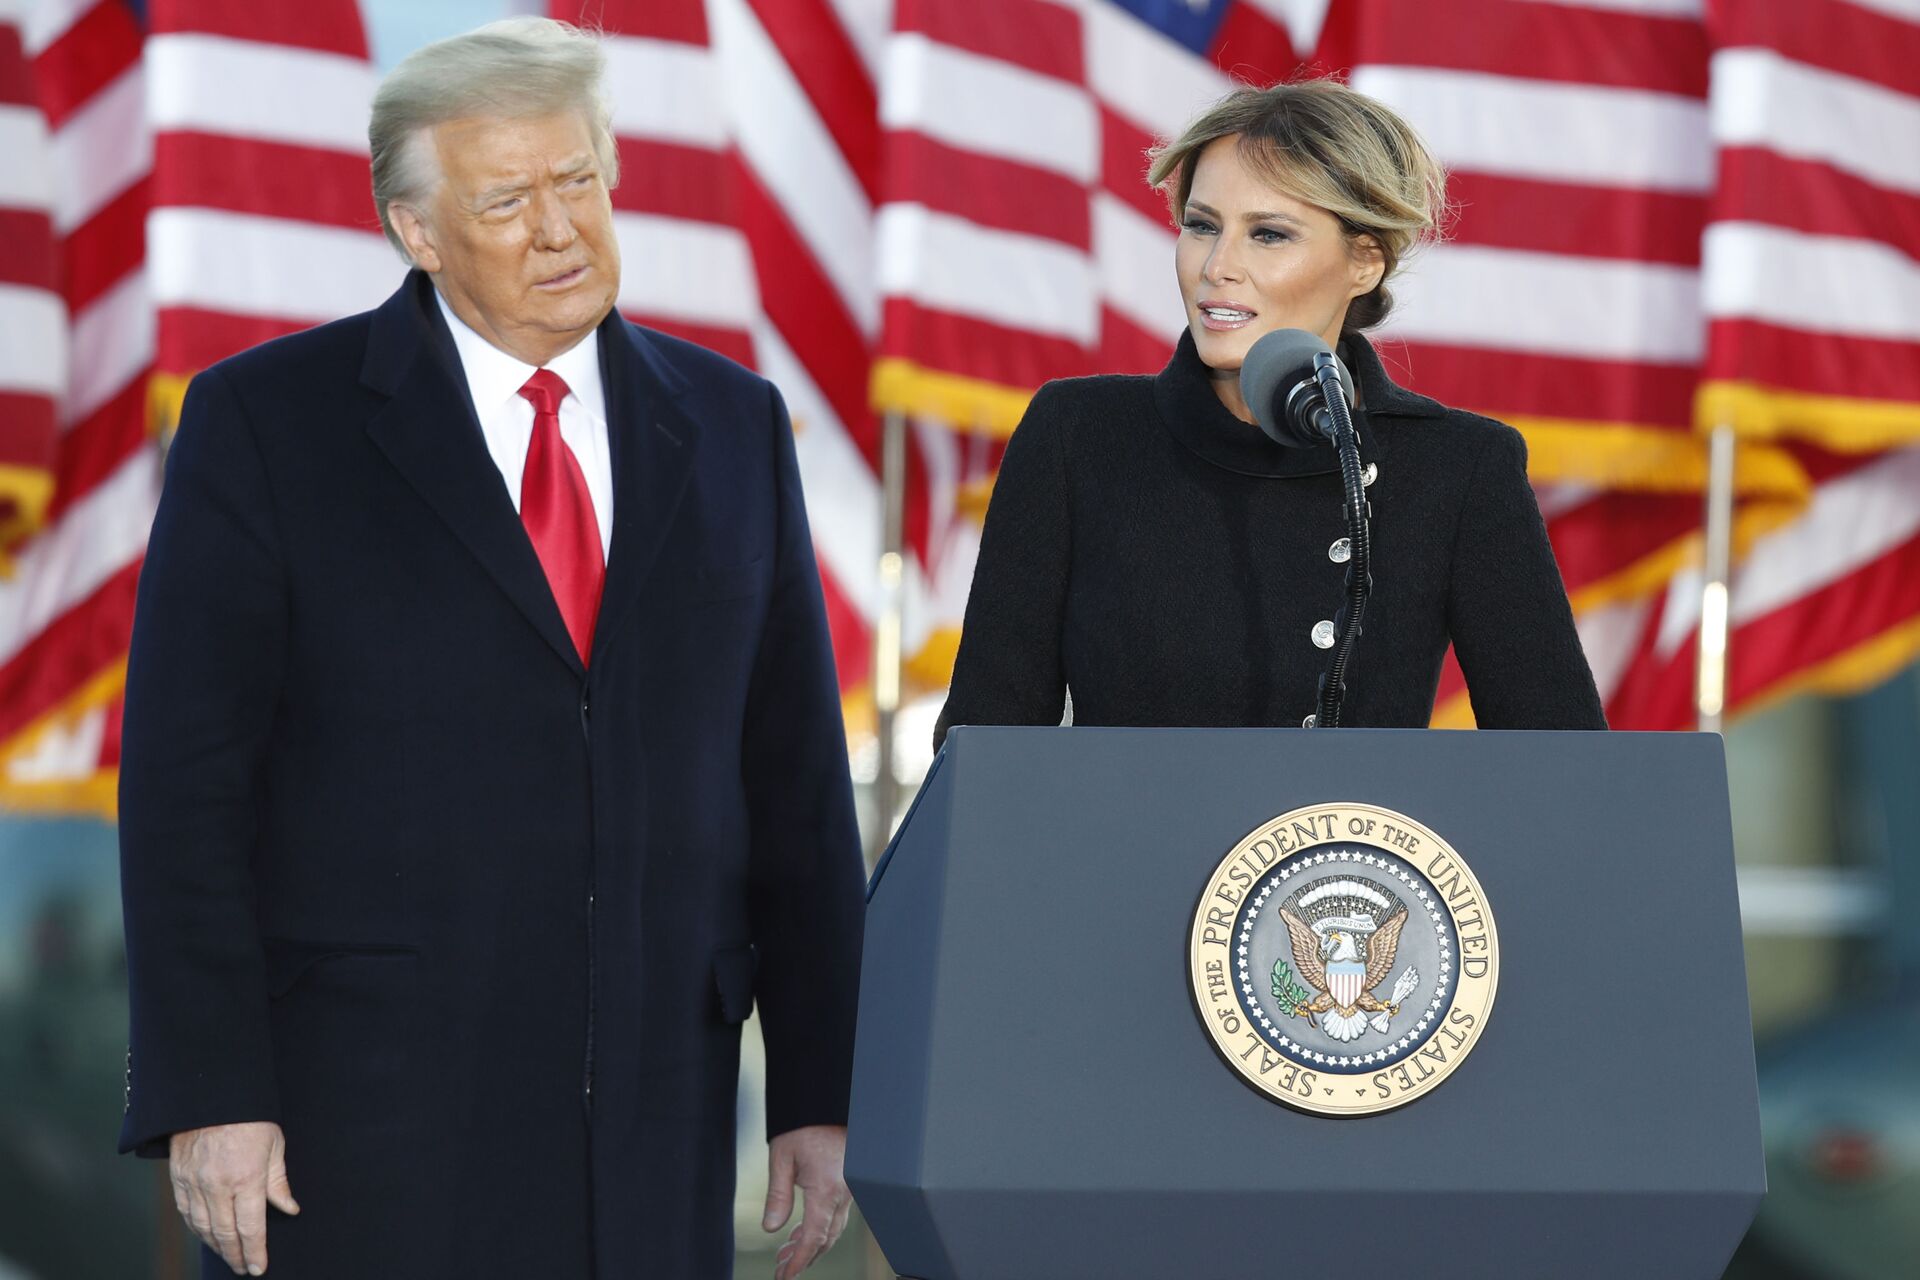 Melania Would 'Elevate' Trump After Every Rally, Say He Was 'Wonderful & Great', Ex-Pal Claims - Sputnik International, 1920, 01.02.2021